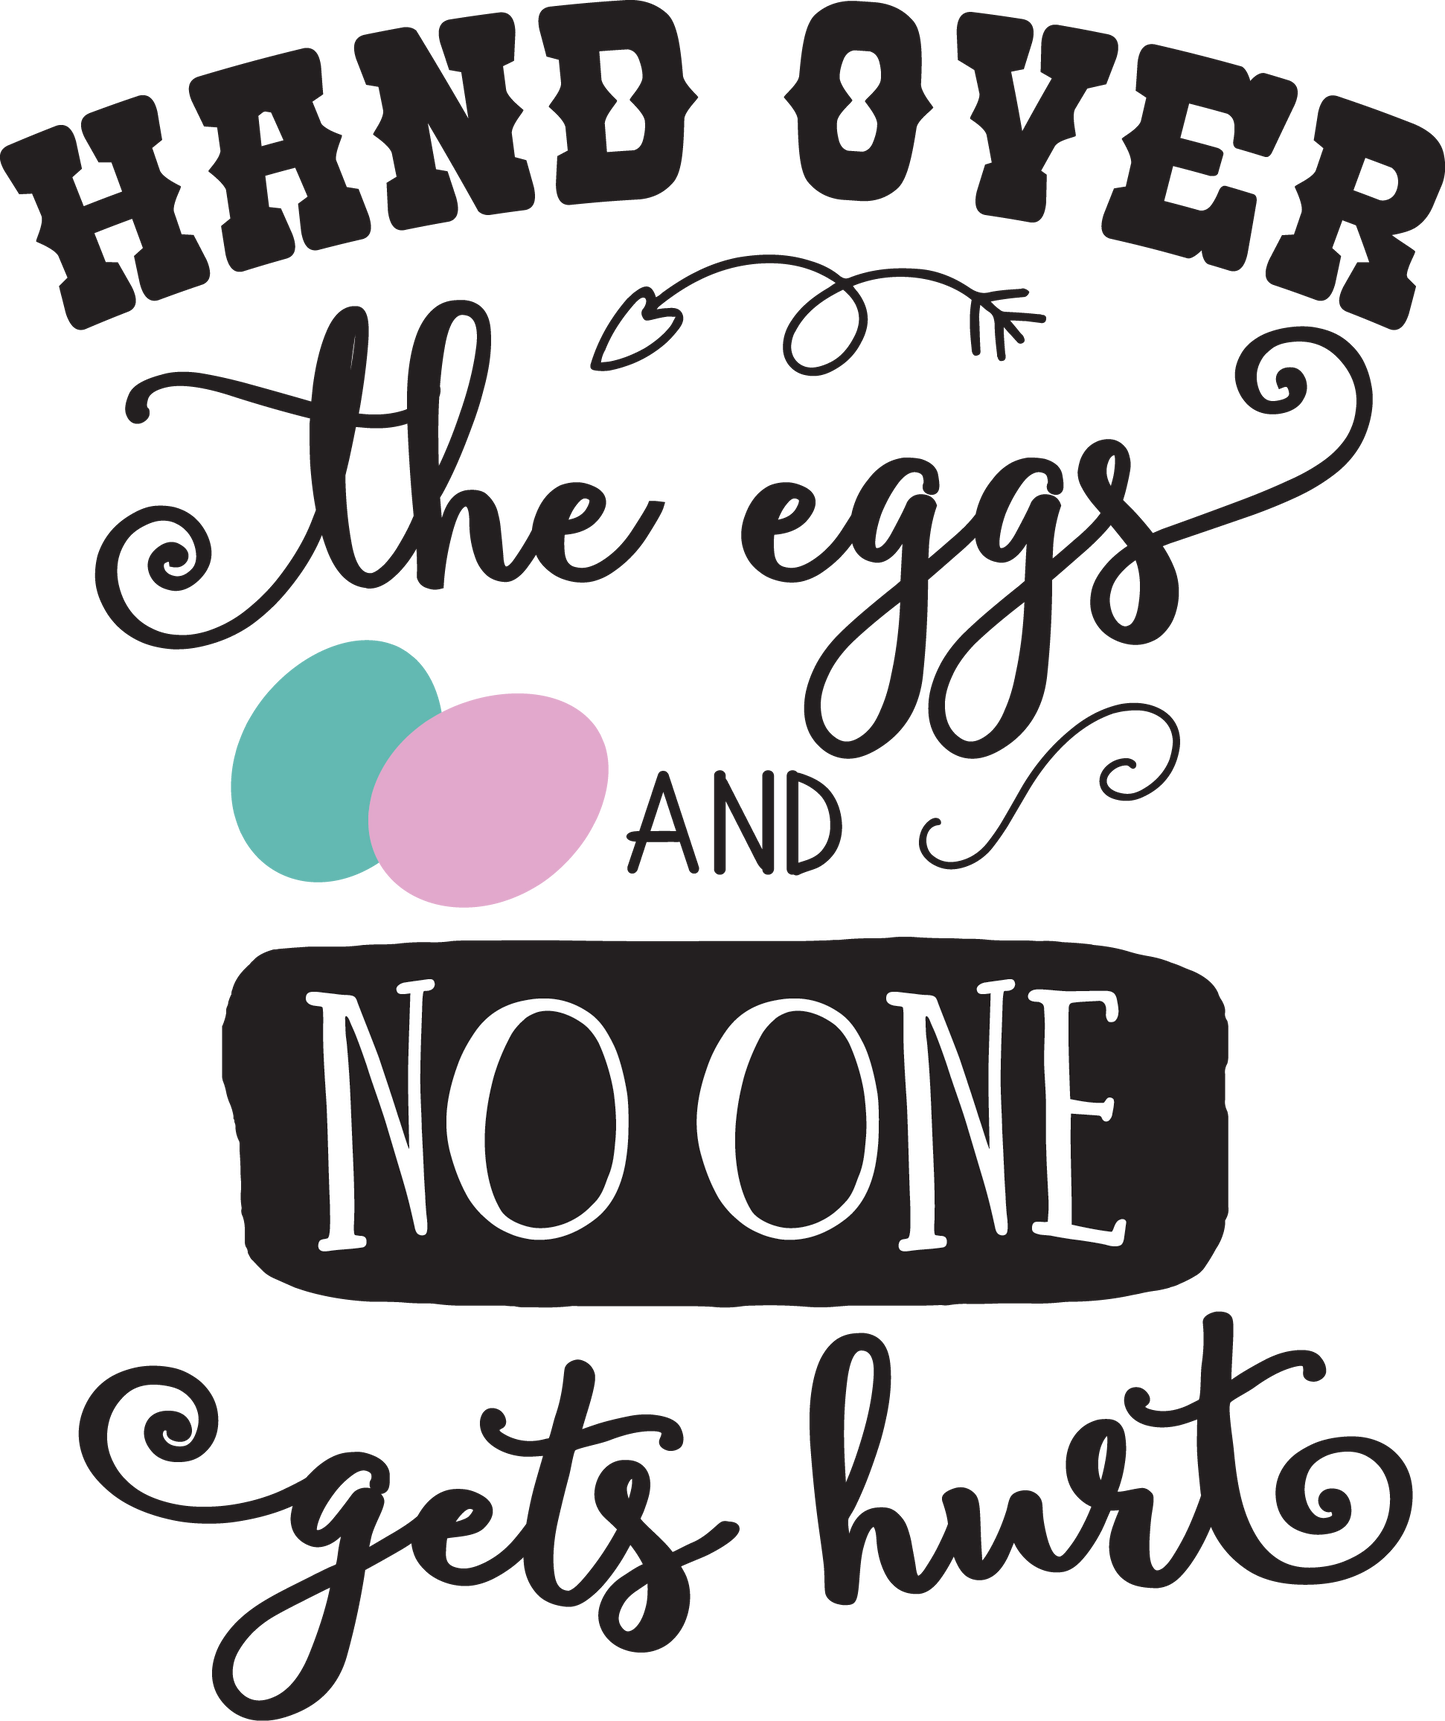 Vinyl Decal | Hand Over the Eggs | Cars, Laptops, Etc.